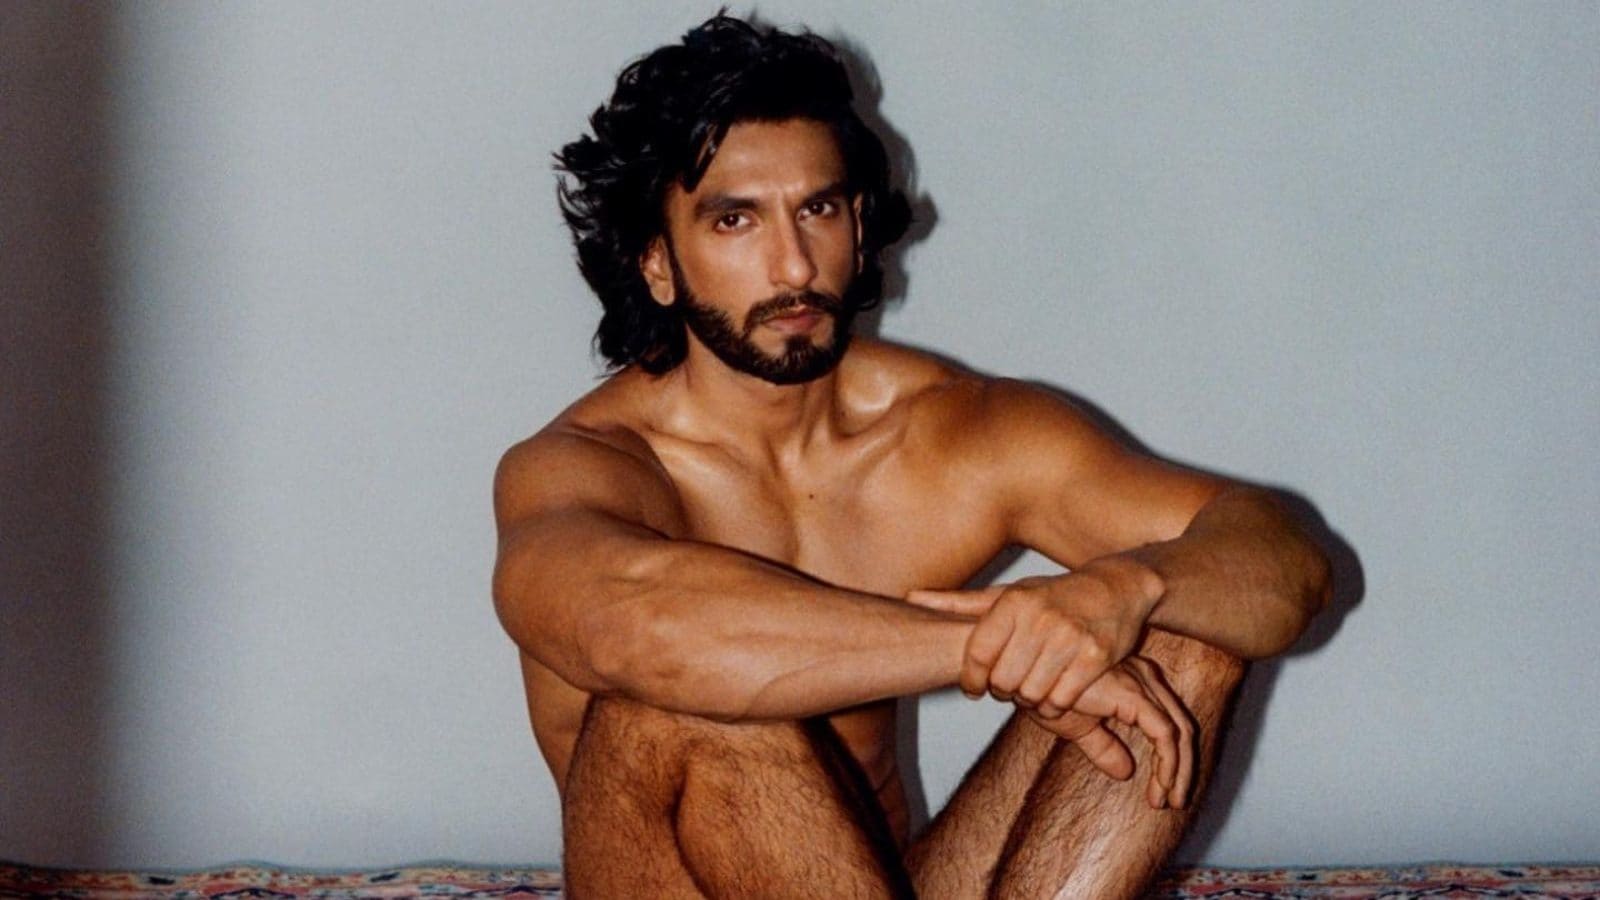 Professional Indian Models Nude Photo Shoot - BuzzFix: Why Ranveer Singh's Masculinity Redefining Nude Shoot Does Not  Insult Women's Modesty